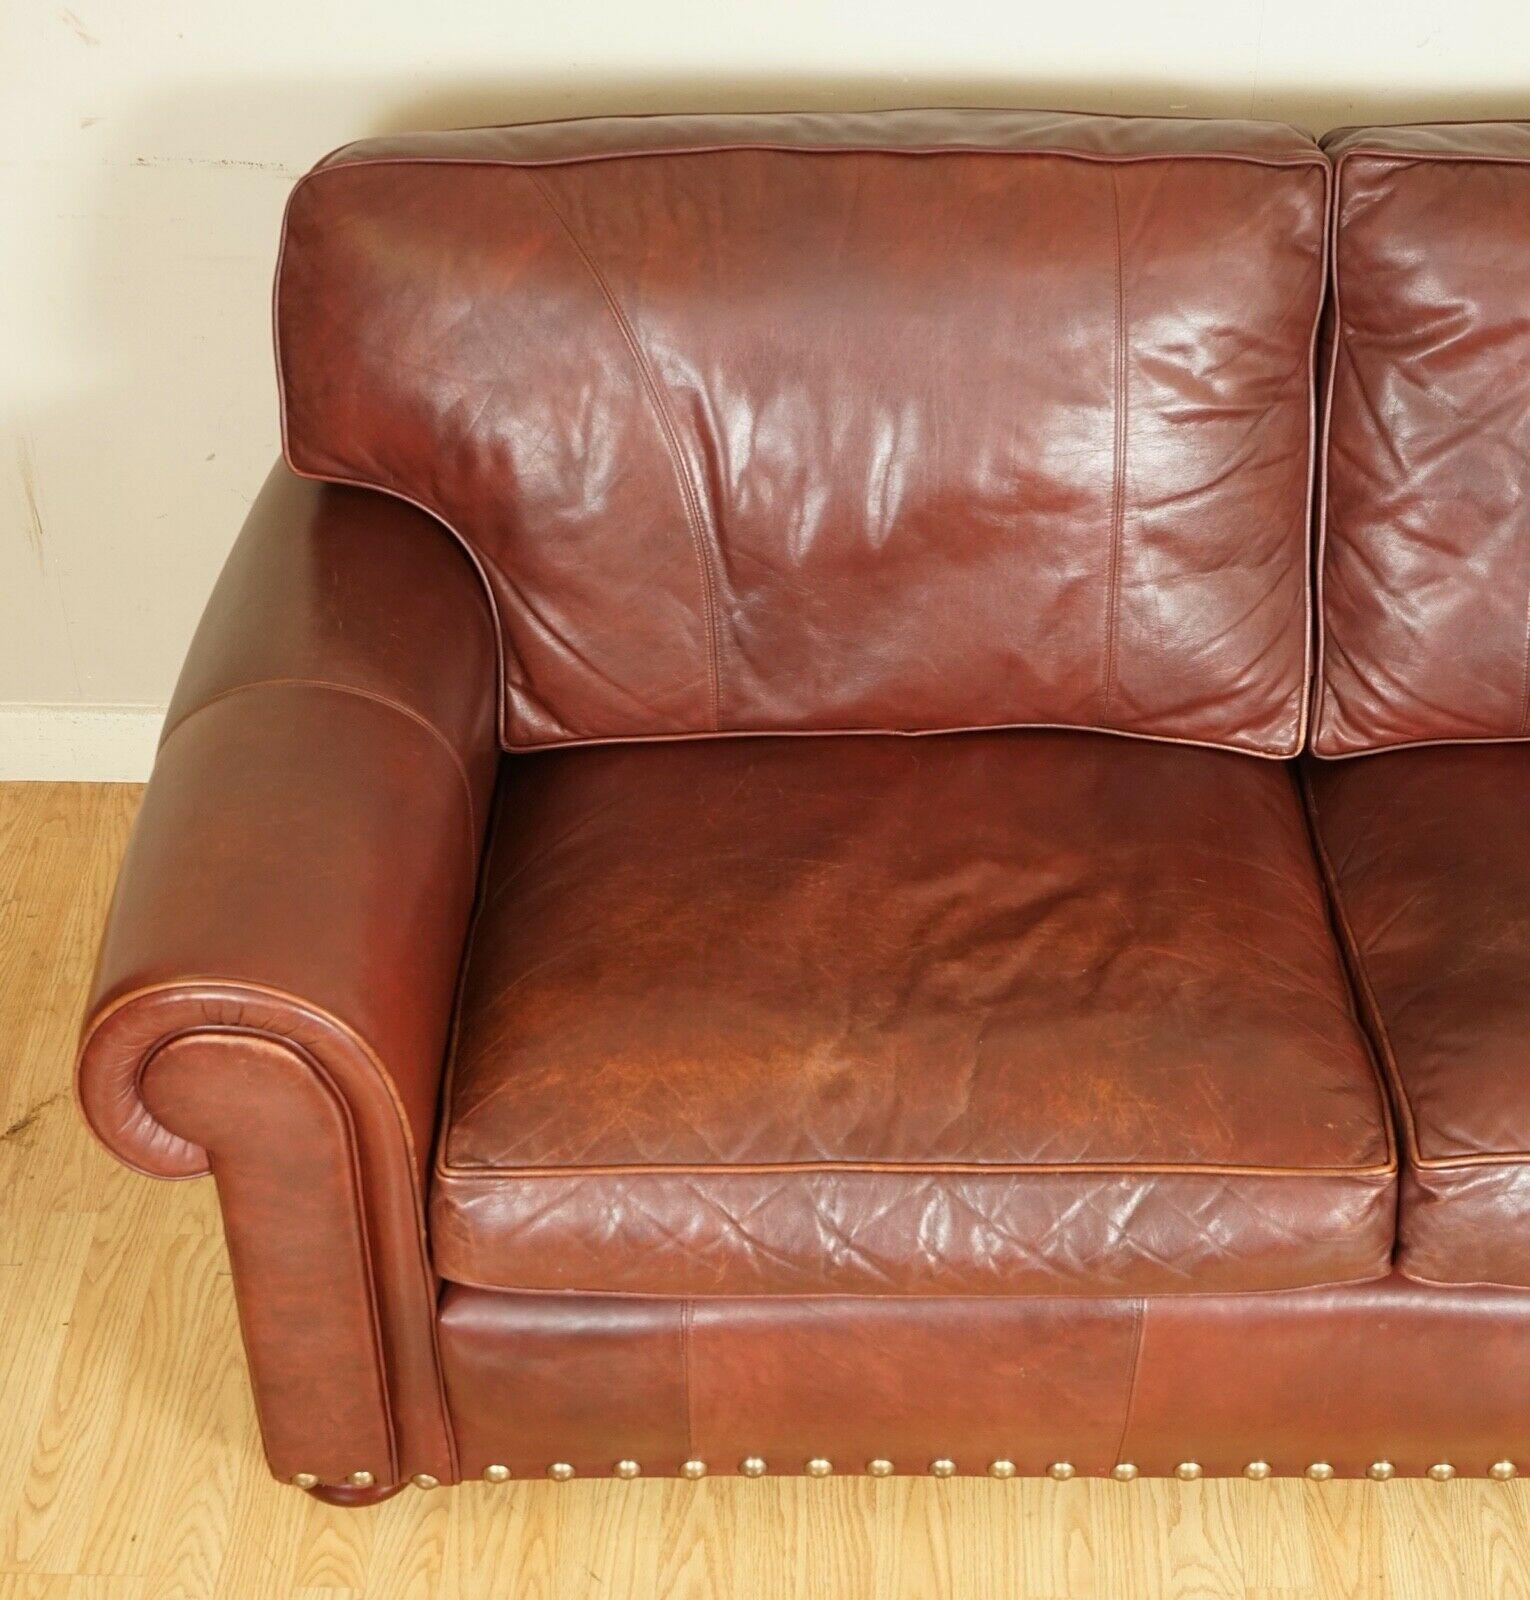 British Stunning Wade Upholstery Redish Brown Two Seater Sofa, Grand Sofa Available